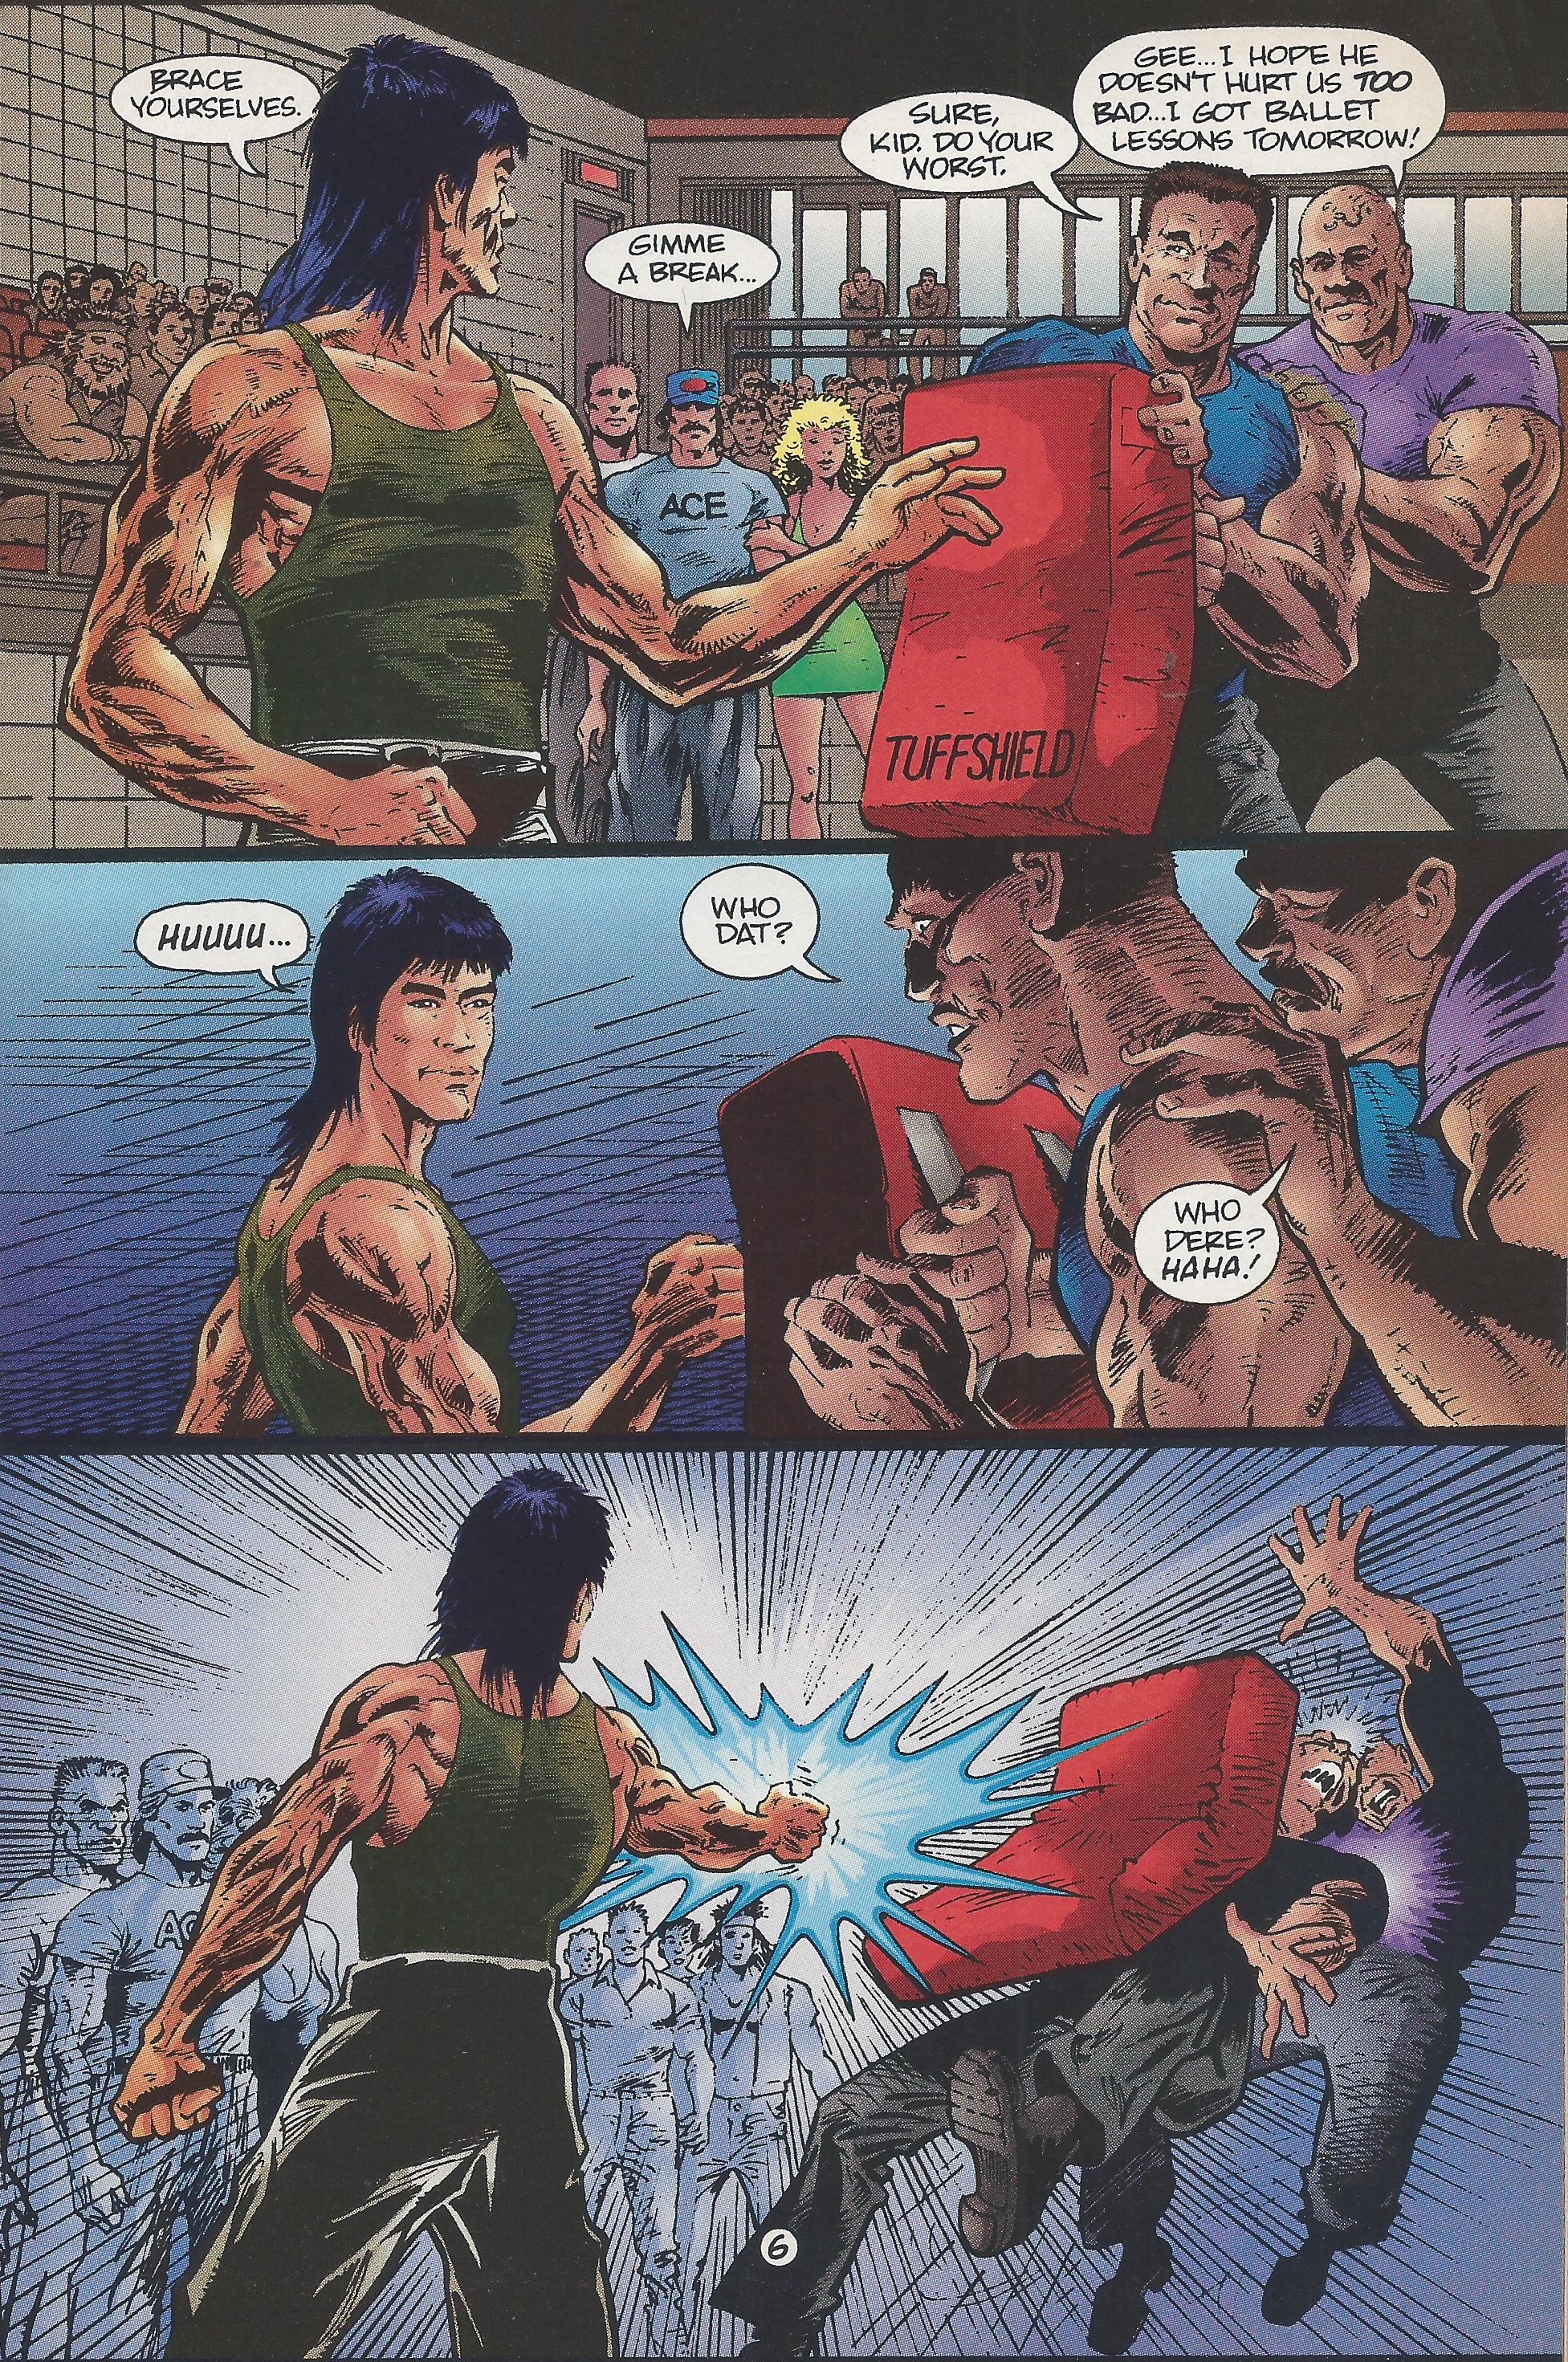 Bruce Lee Comics (1994) | Brian Camp's Film and Anime Blog